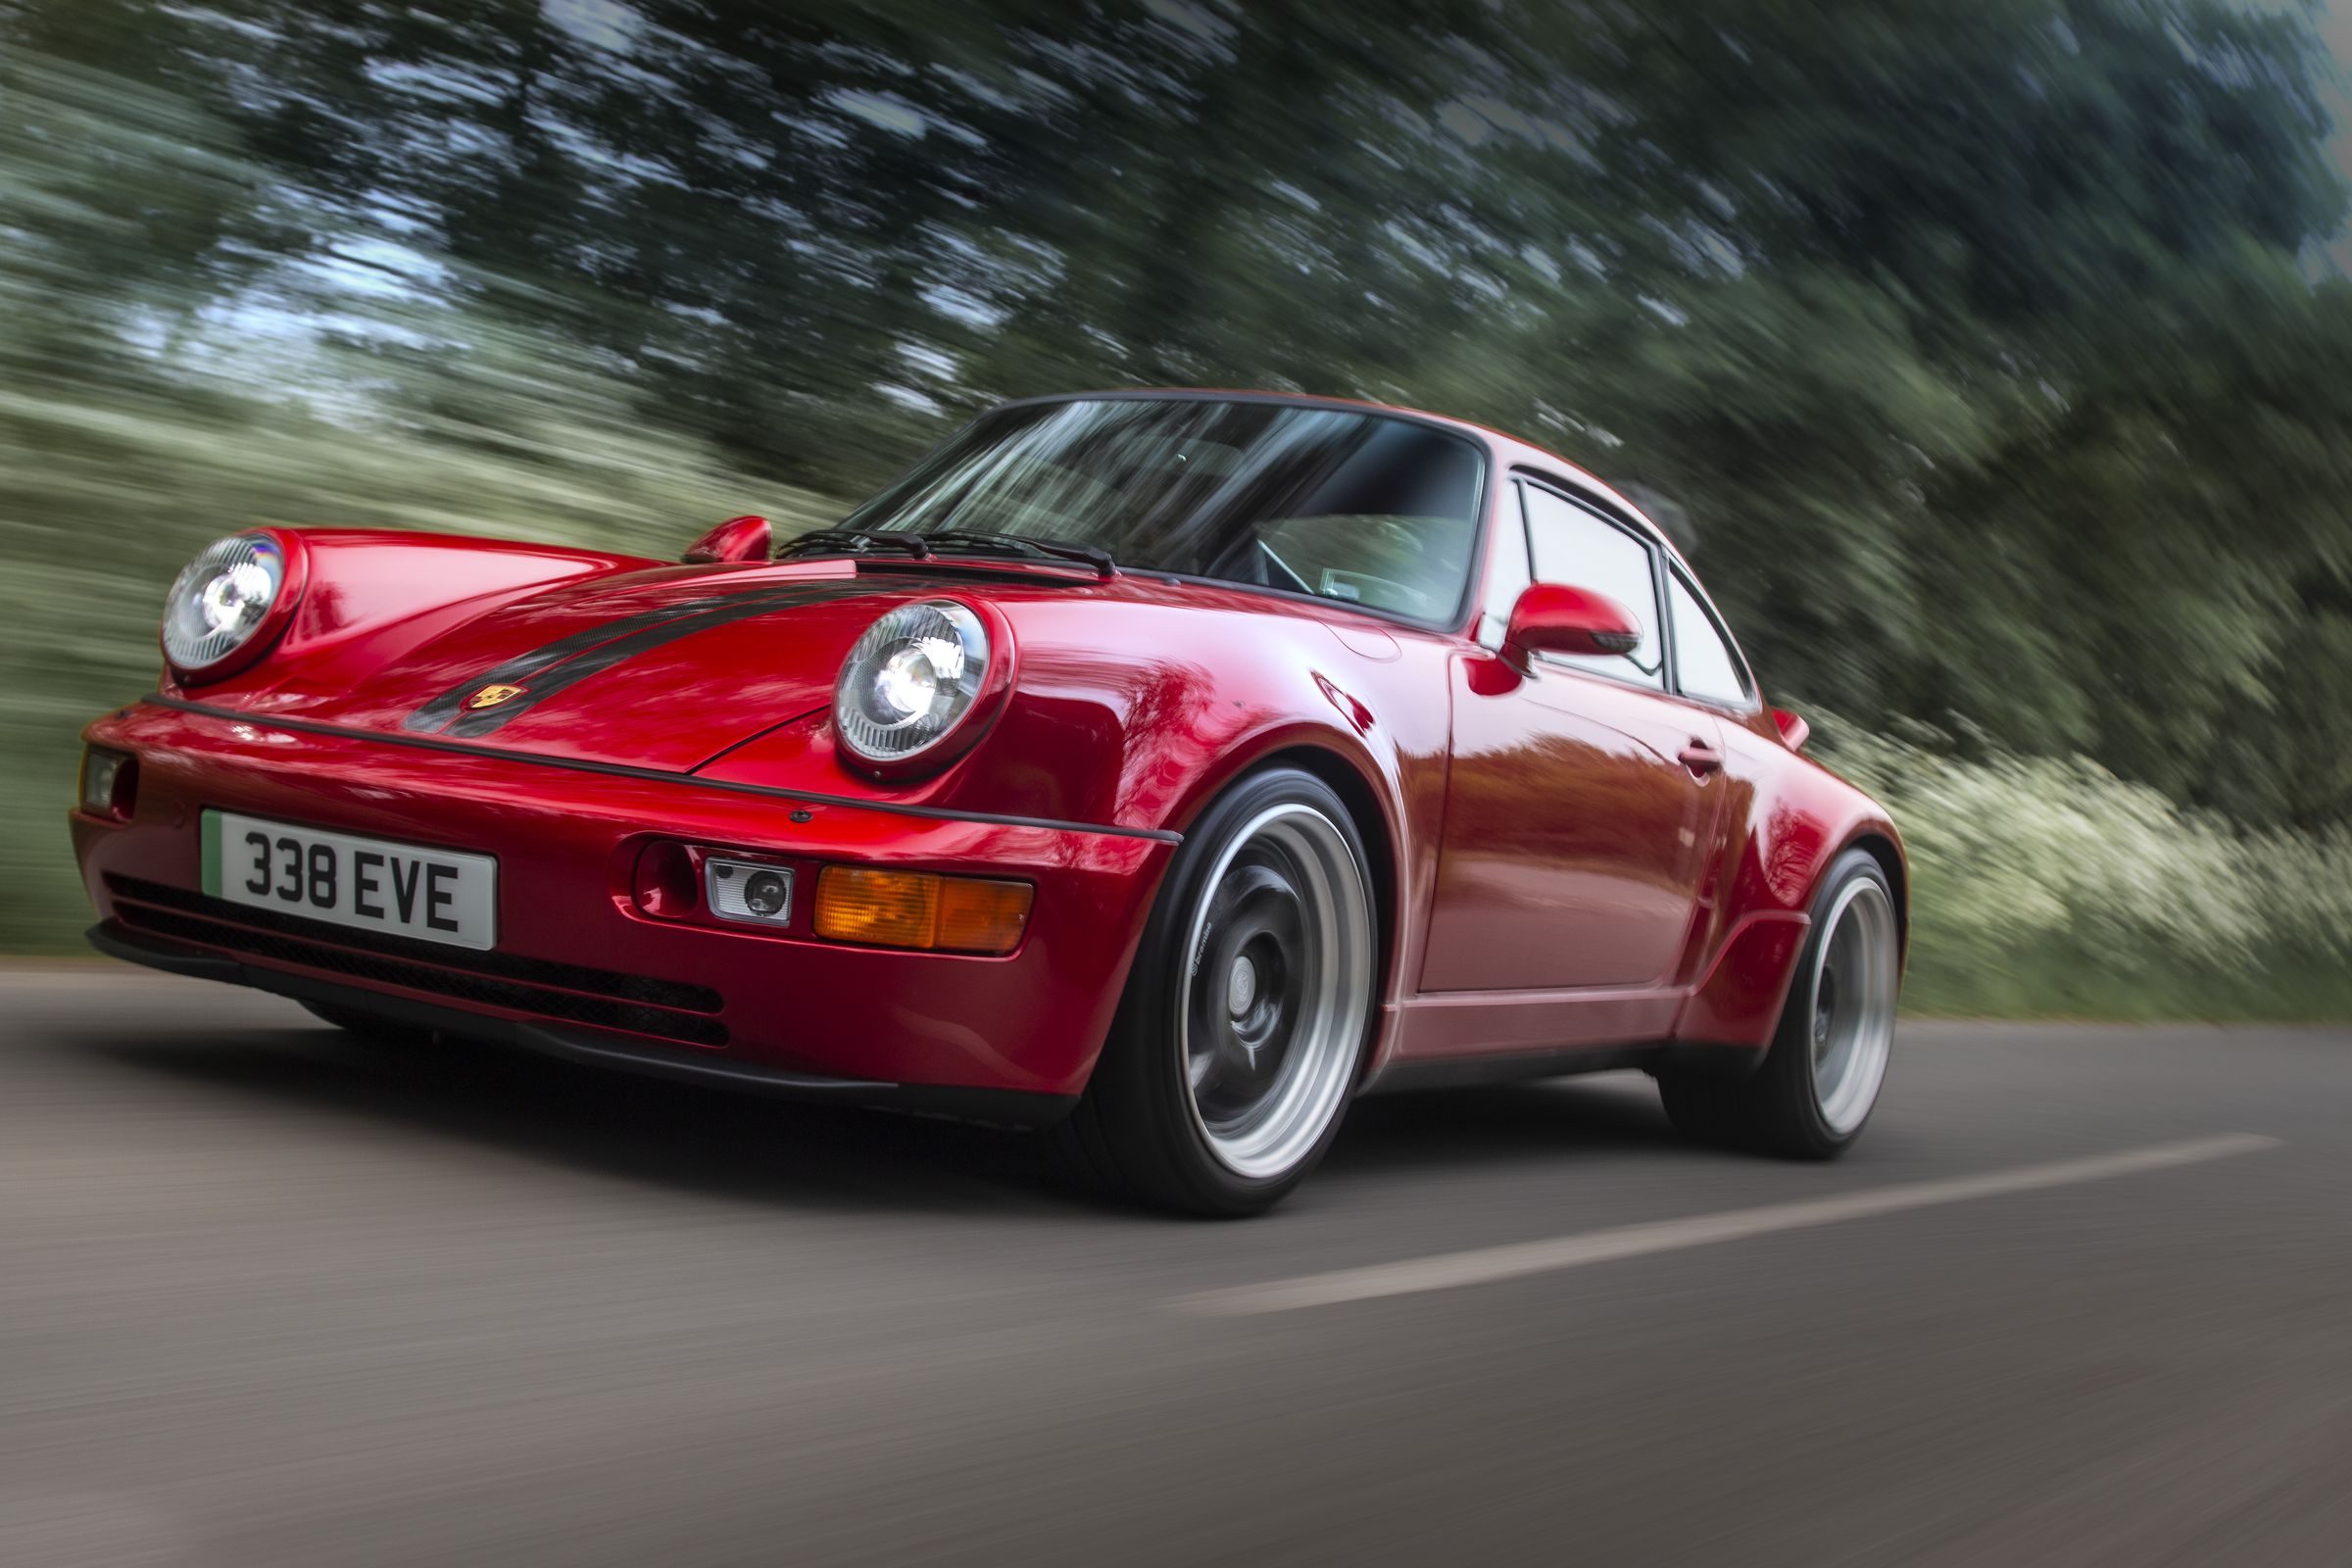 Red classic Porsche 911 964 driving on street